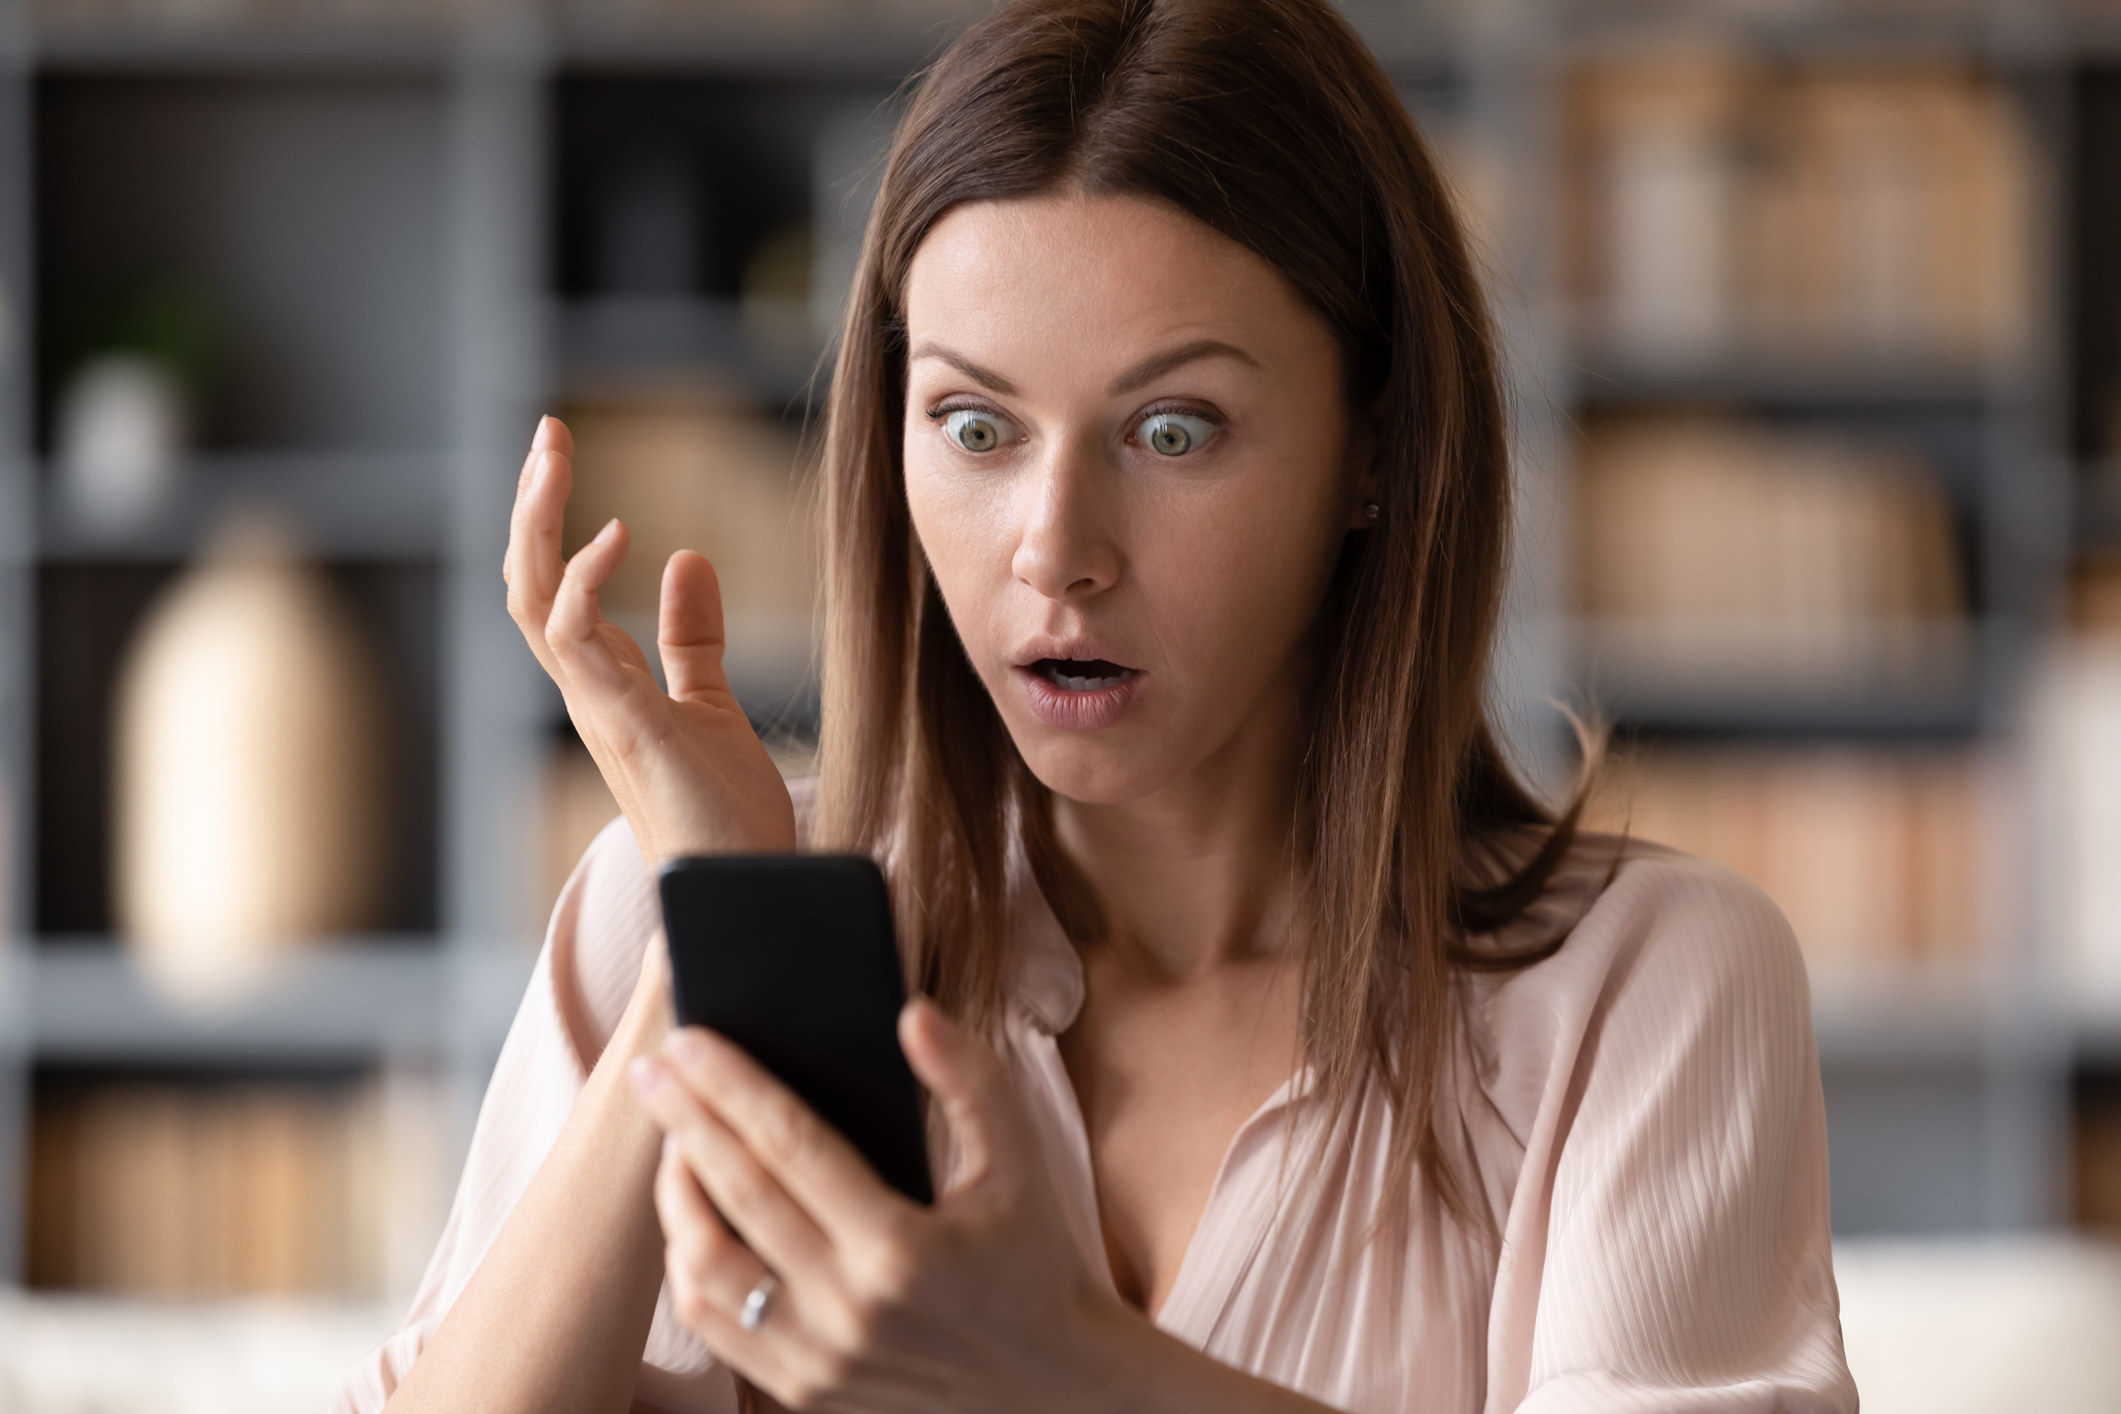 Woman shocked while looking at cellphone